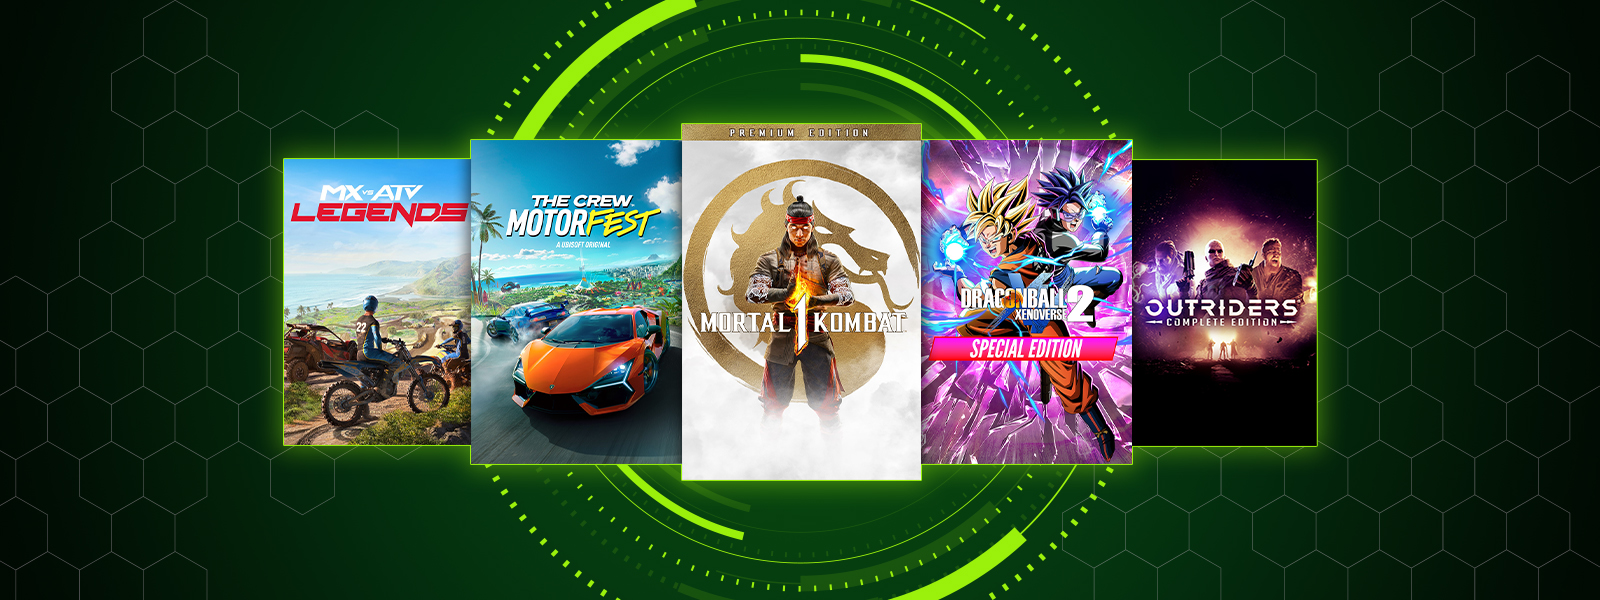 Box art from games included in the Achievement Hunter Sale, including Mortal Kombat 1 Premium Edition, The Crew - Motorfest - Cross Gen Bundle, and Dragon Ball Xenoverse 2 - Special Edition.